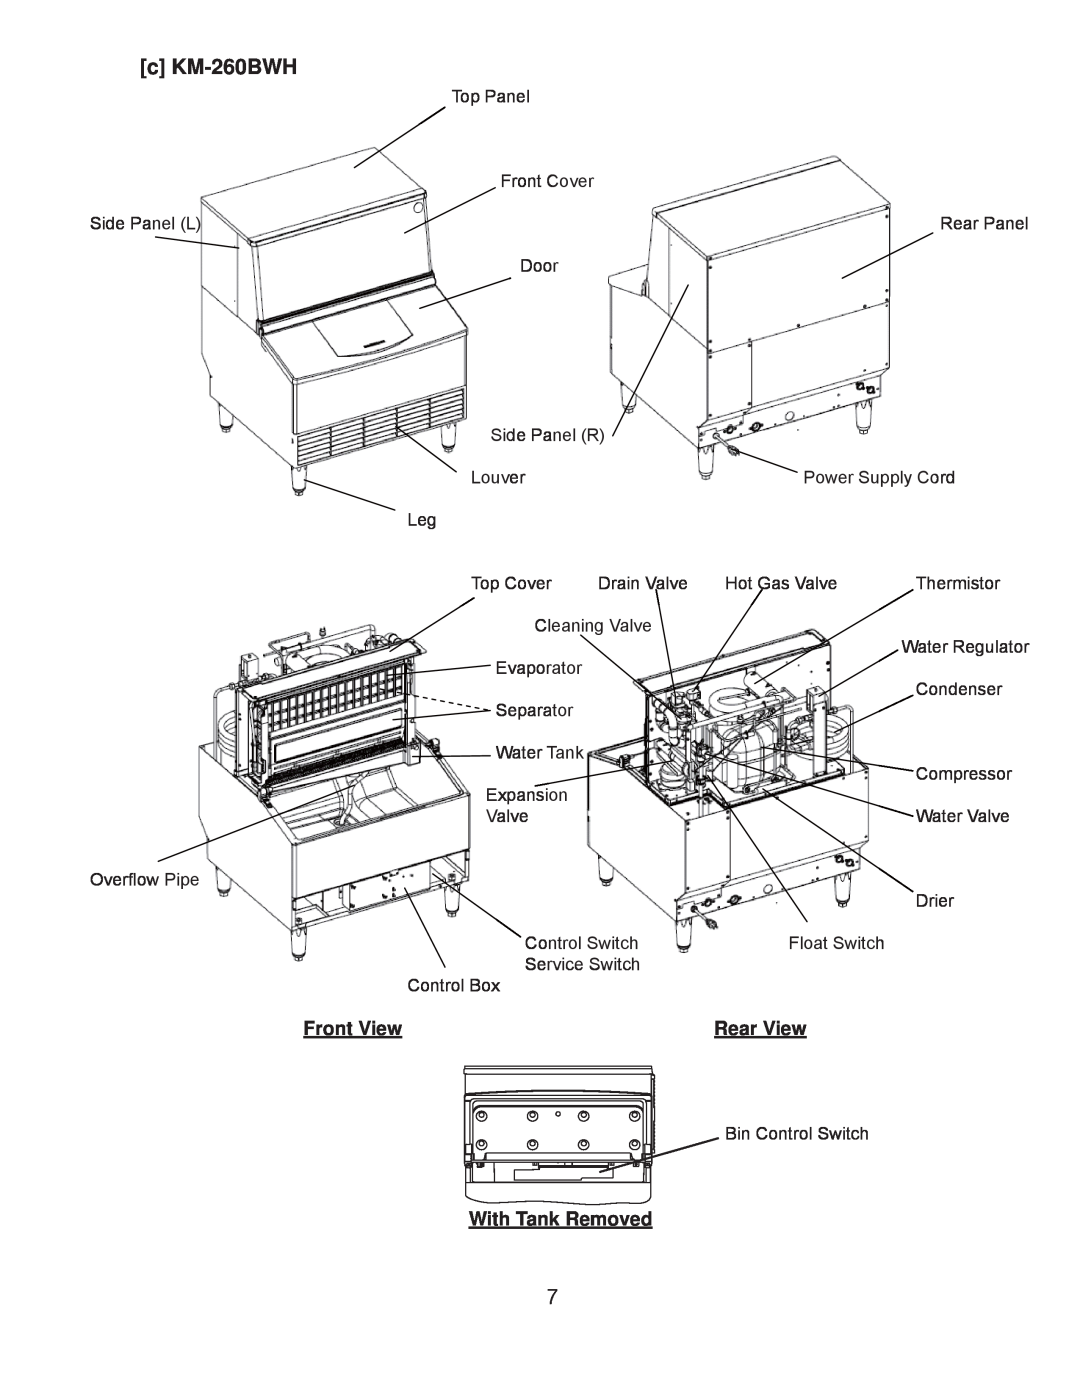 Hoshizaki KM-260BAH, KM-201BAH, KM-201BWH service manual c KM-260BWH, Front View, Rear View, With Tank Removed 